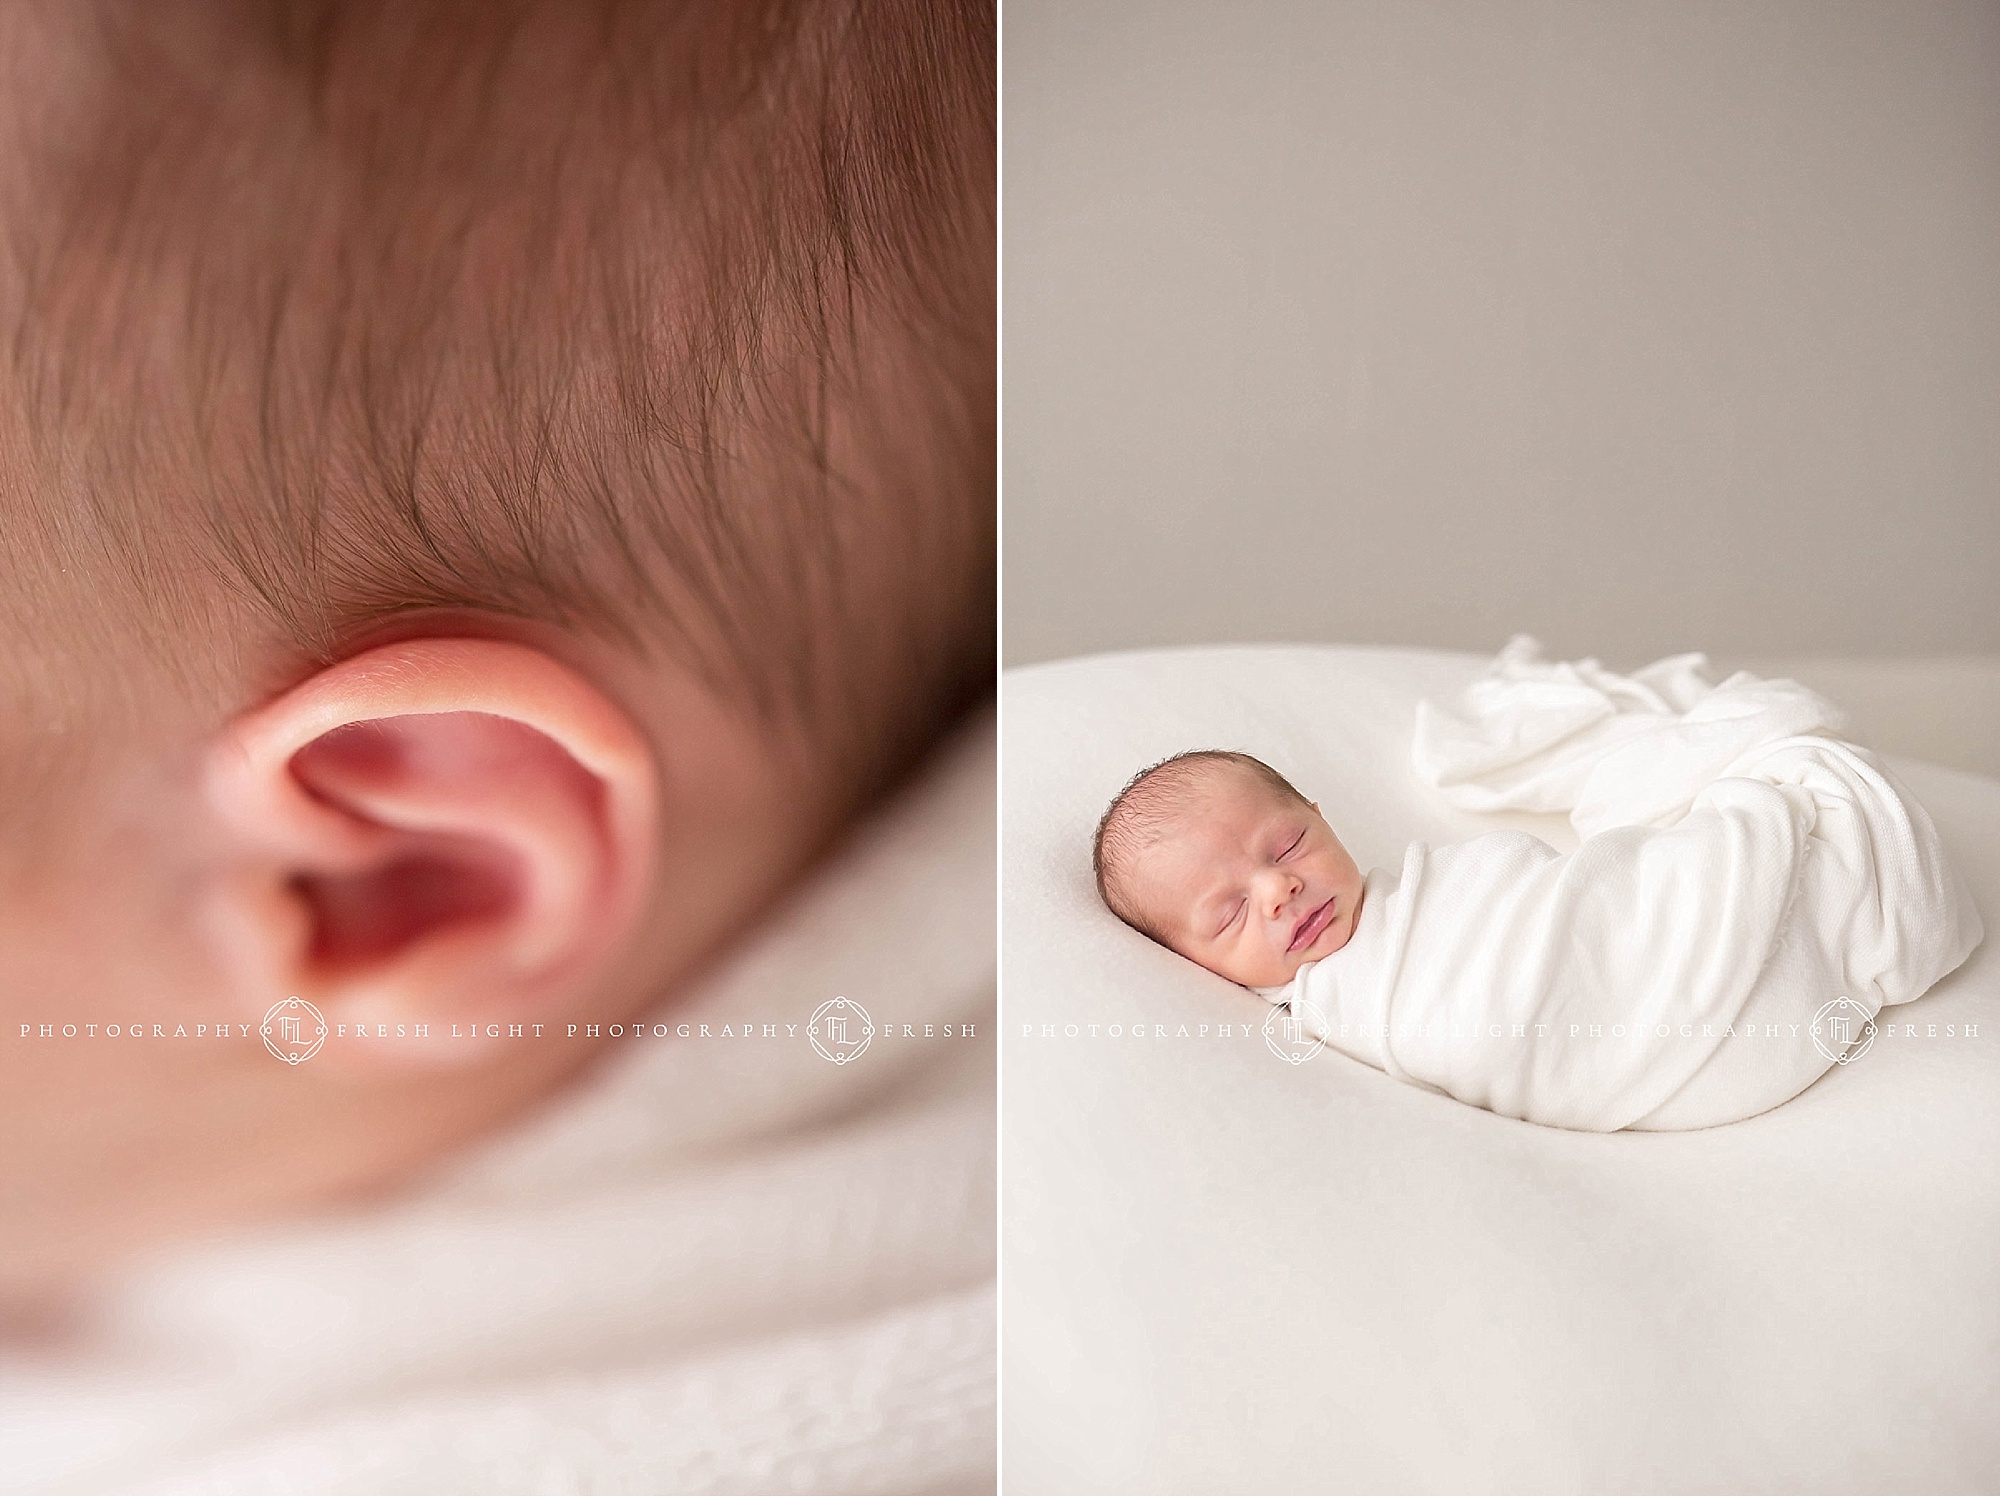 photography close up of baby ear